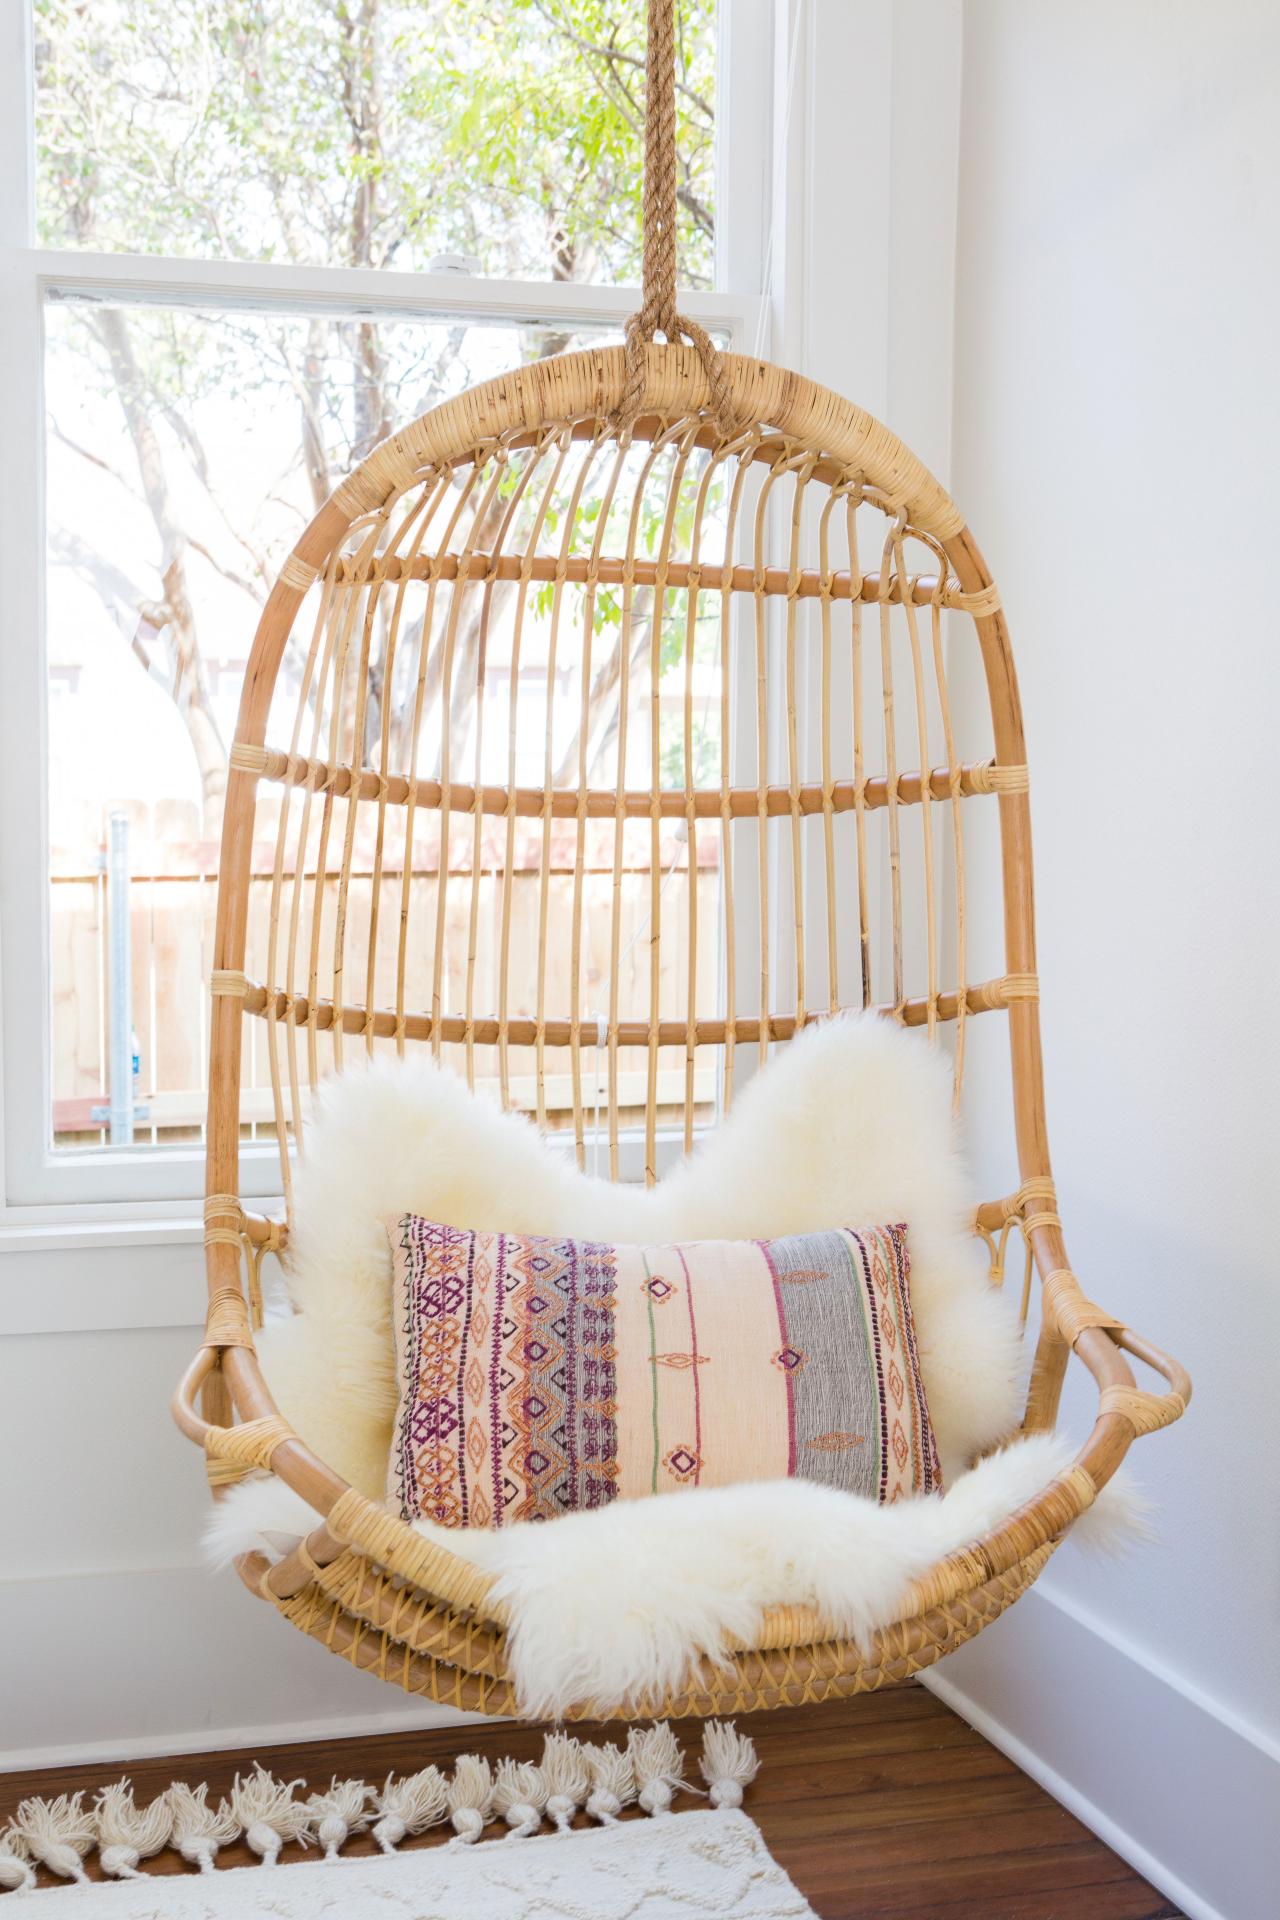 Contemporary White Girls Bedroom With Neutral Rattan Chair